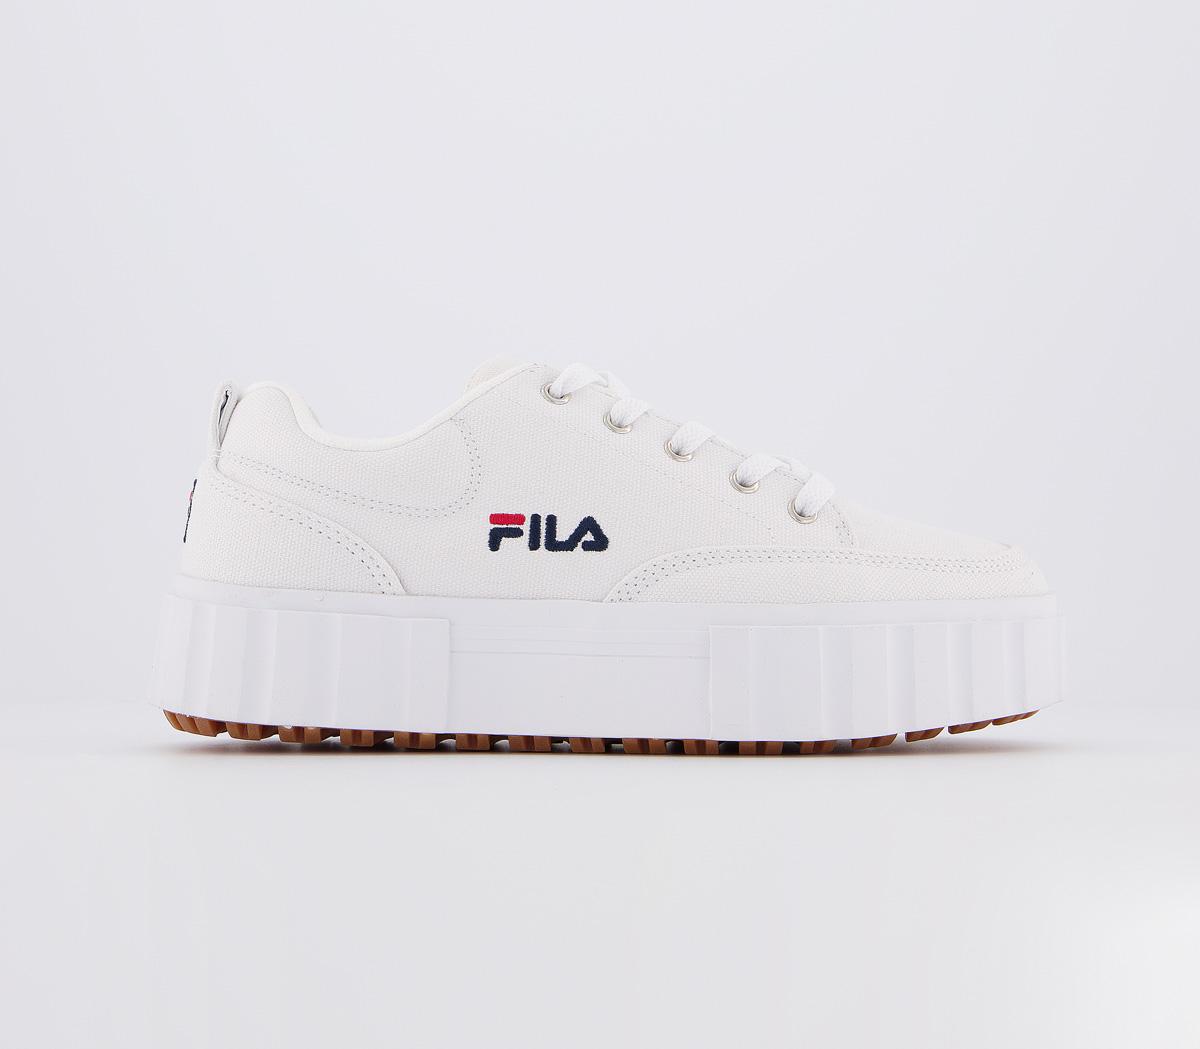 Fila Sandblast Low Trainers White Navy Red - Hers trainers